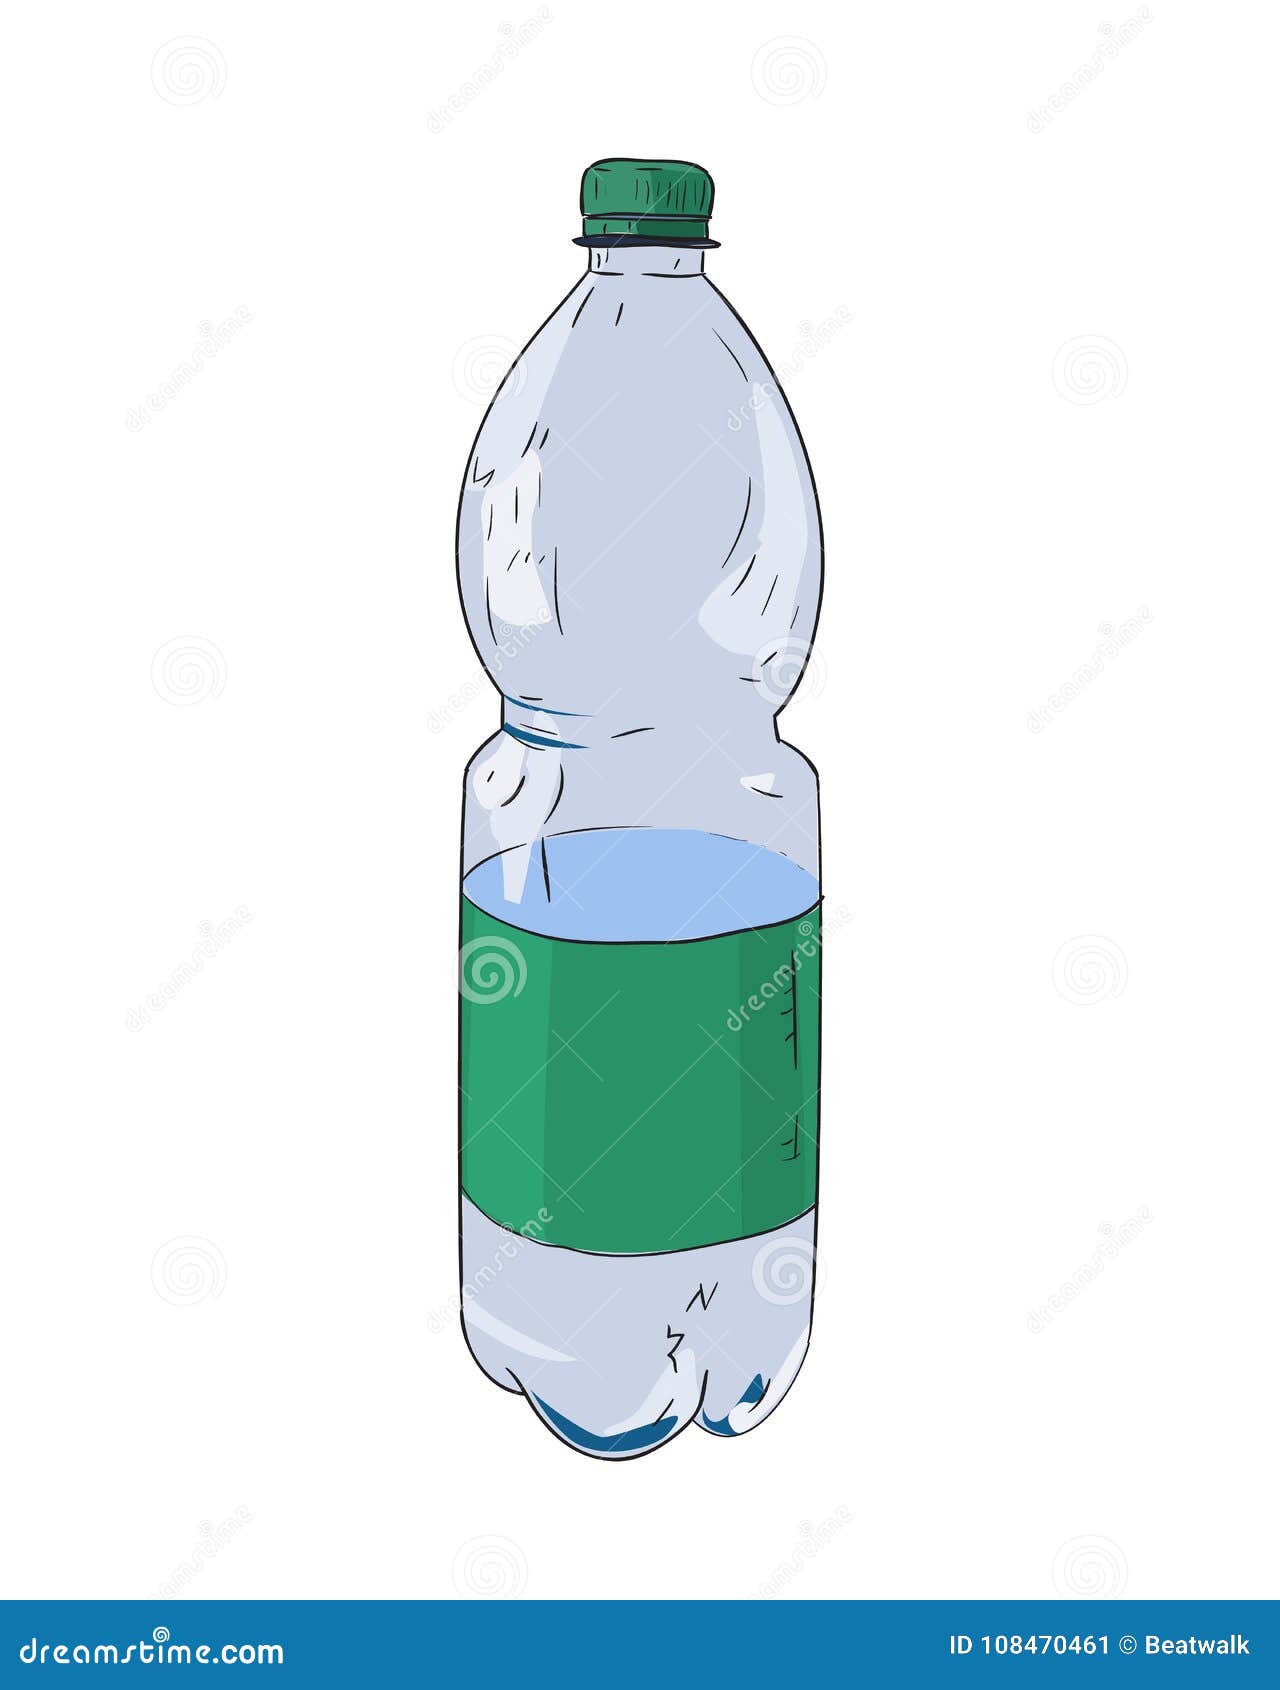 Sketch of one plastic bottle  CanStock